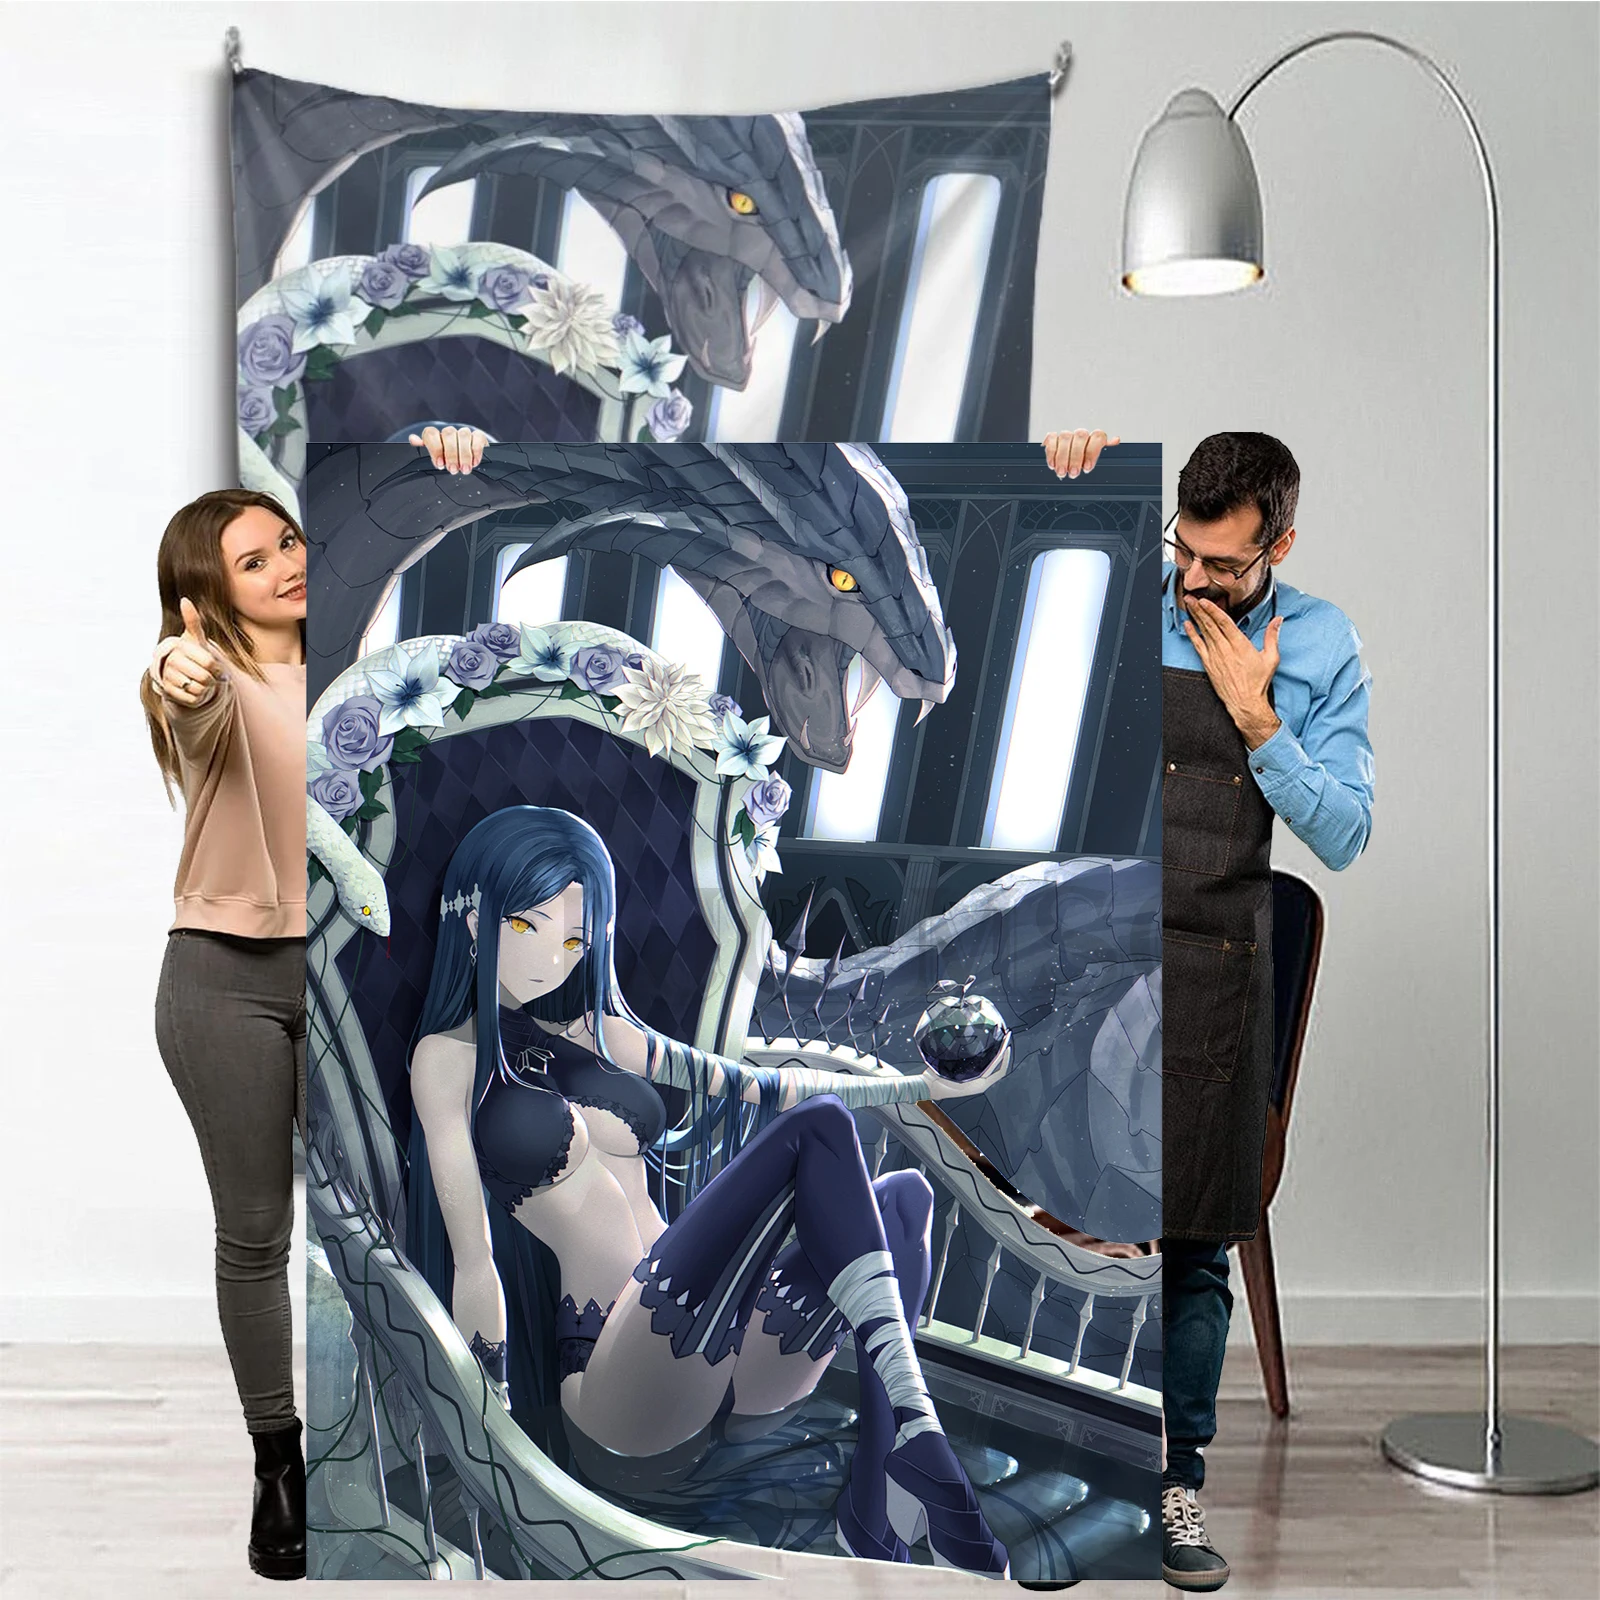 

Hentai Anime Poster Tapestry Action Animation Tapestries Sexy Adult Doujinshi Room Decor Demon Girl Artist CG Wall Decoration